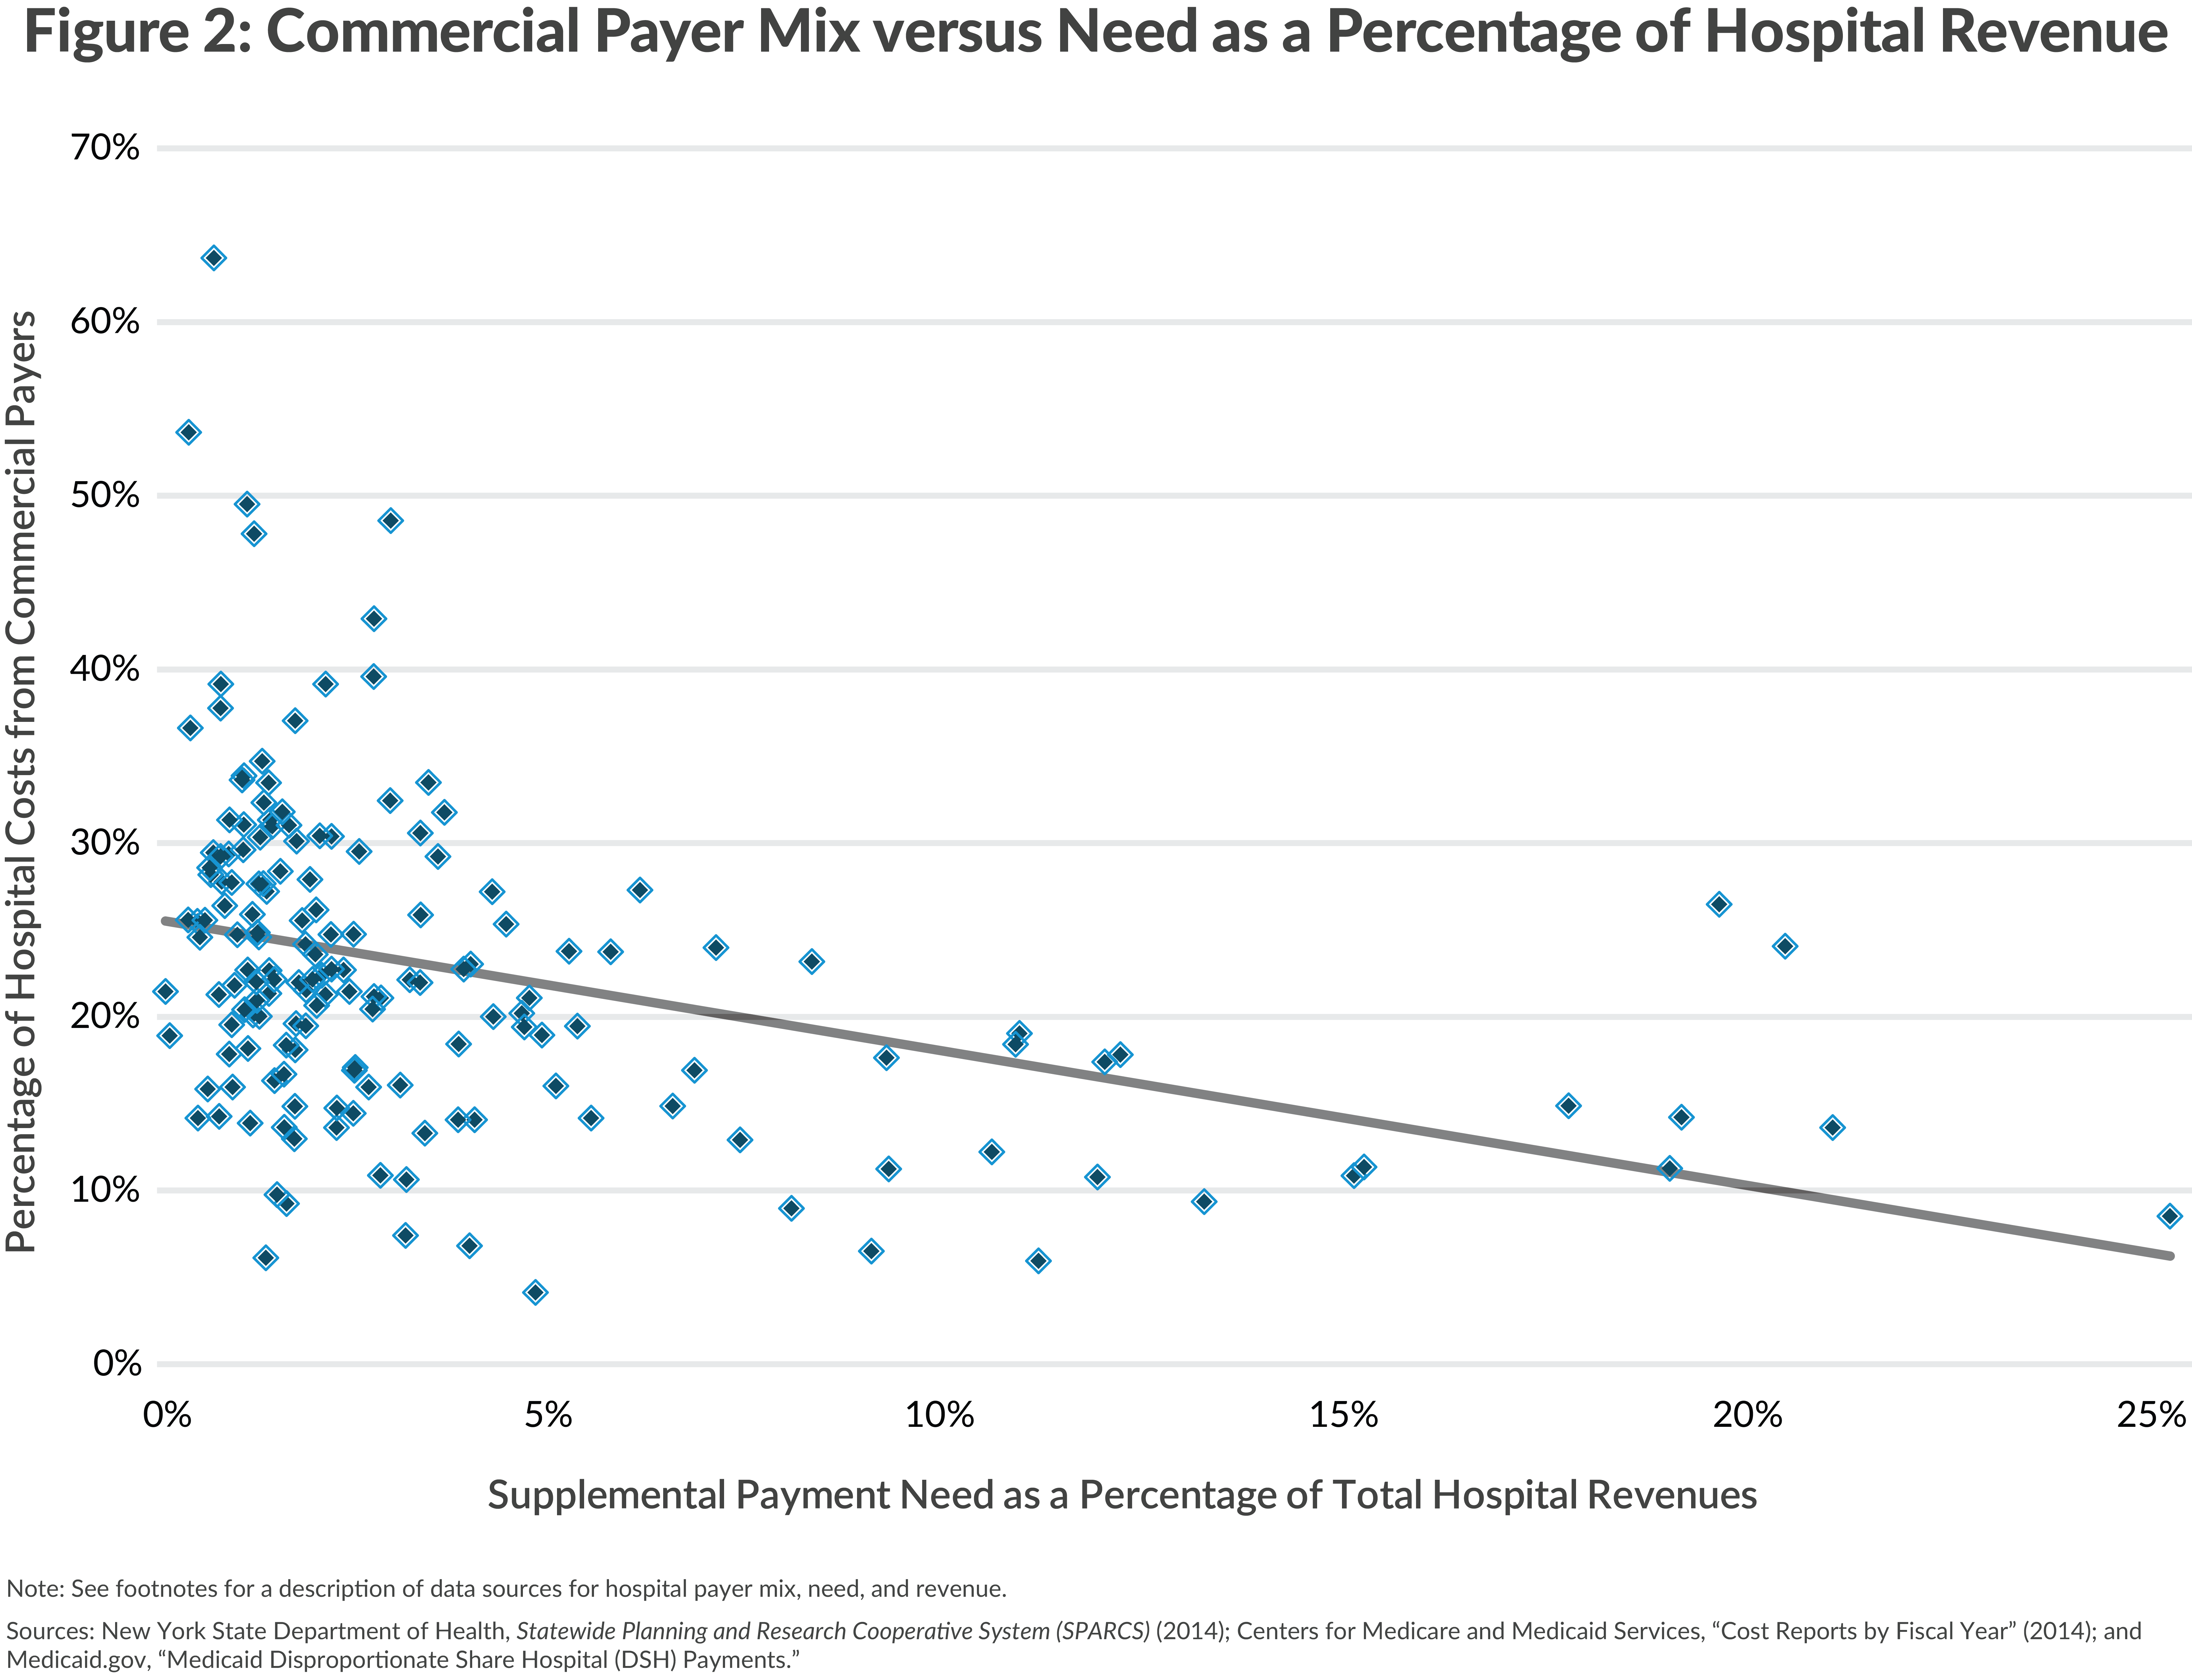 Figure 2: Commercial Payer Mix versus Need as a Percentage of Hospital Revenue